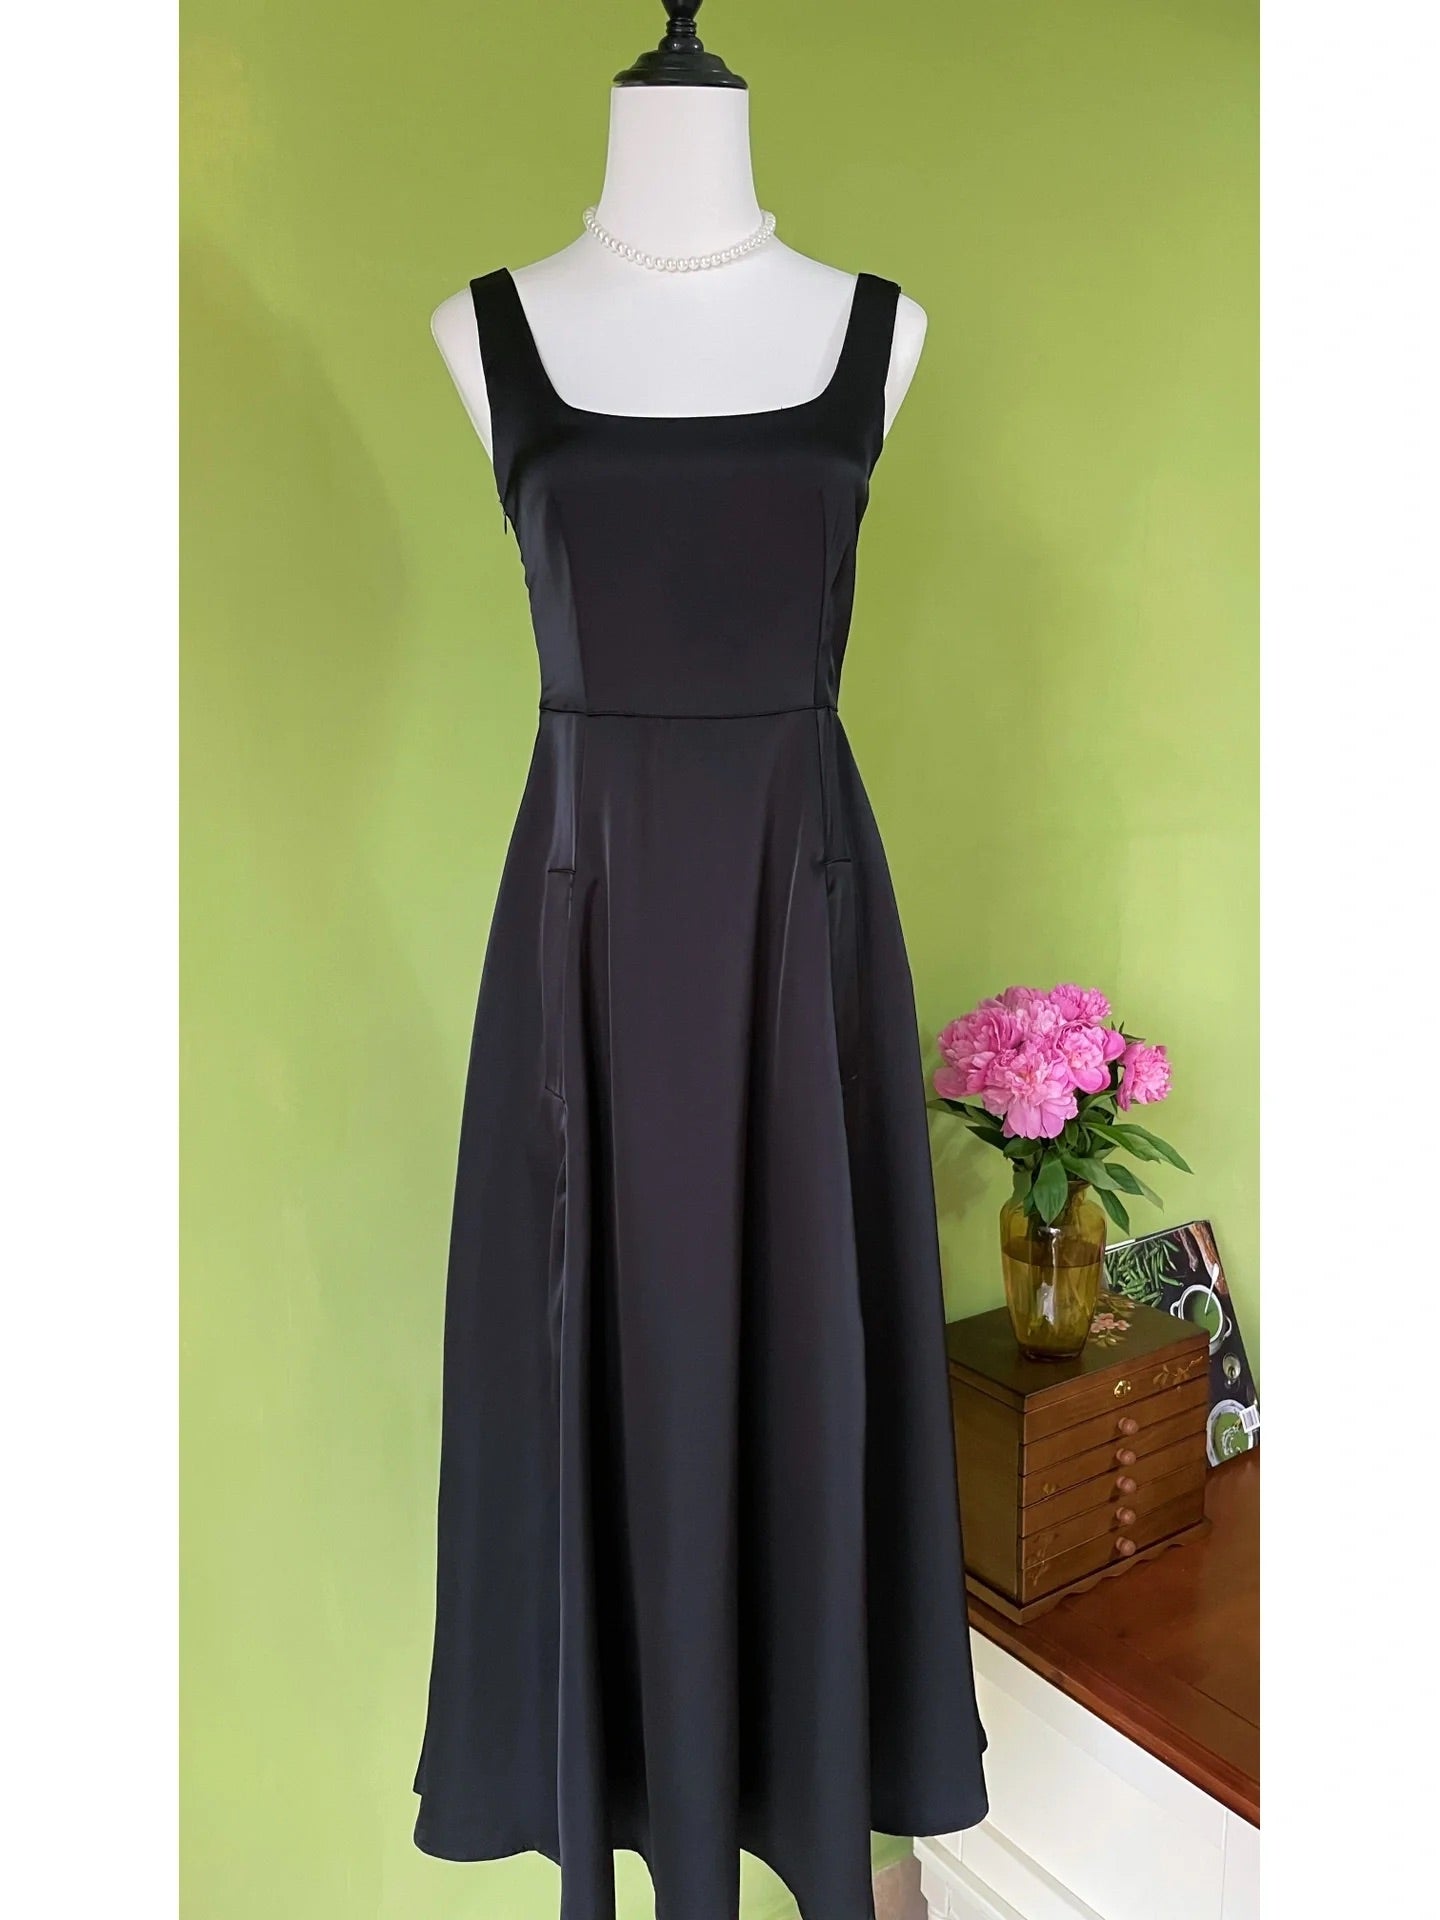 Audrey Hepburn Style Black 50s Vintage Dress with Pockets - DollyGown